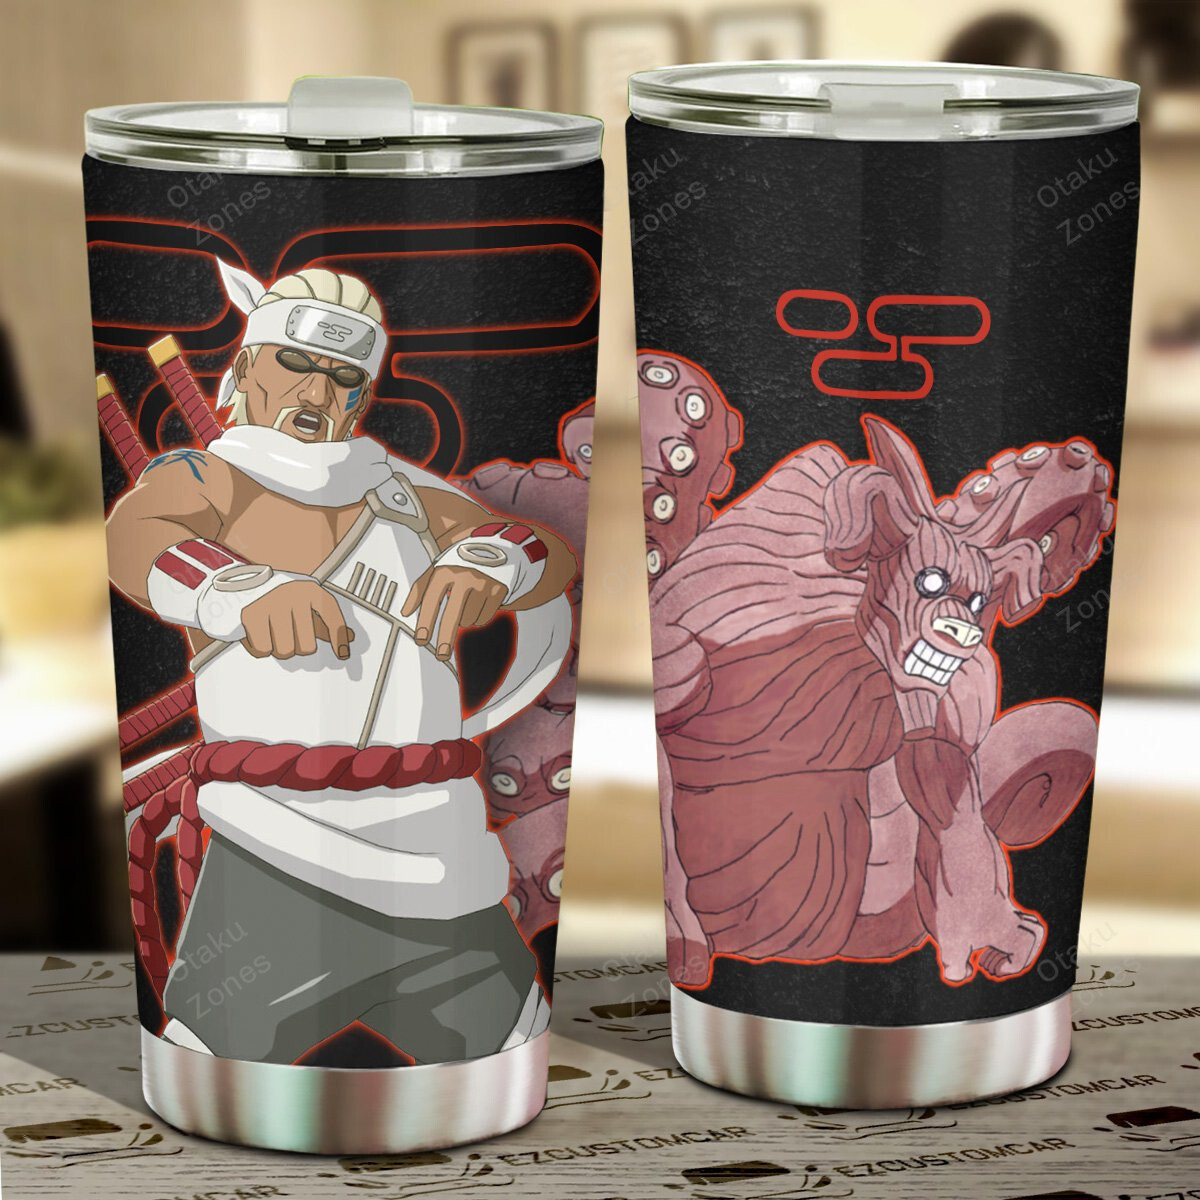 Go ahead and order your new tumbler now! 32